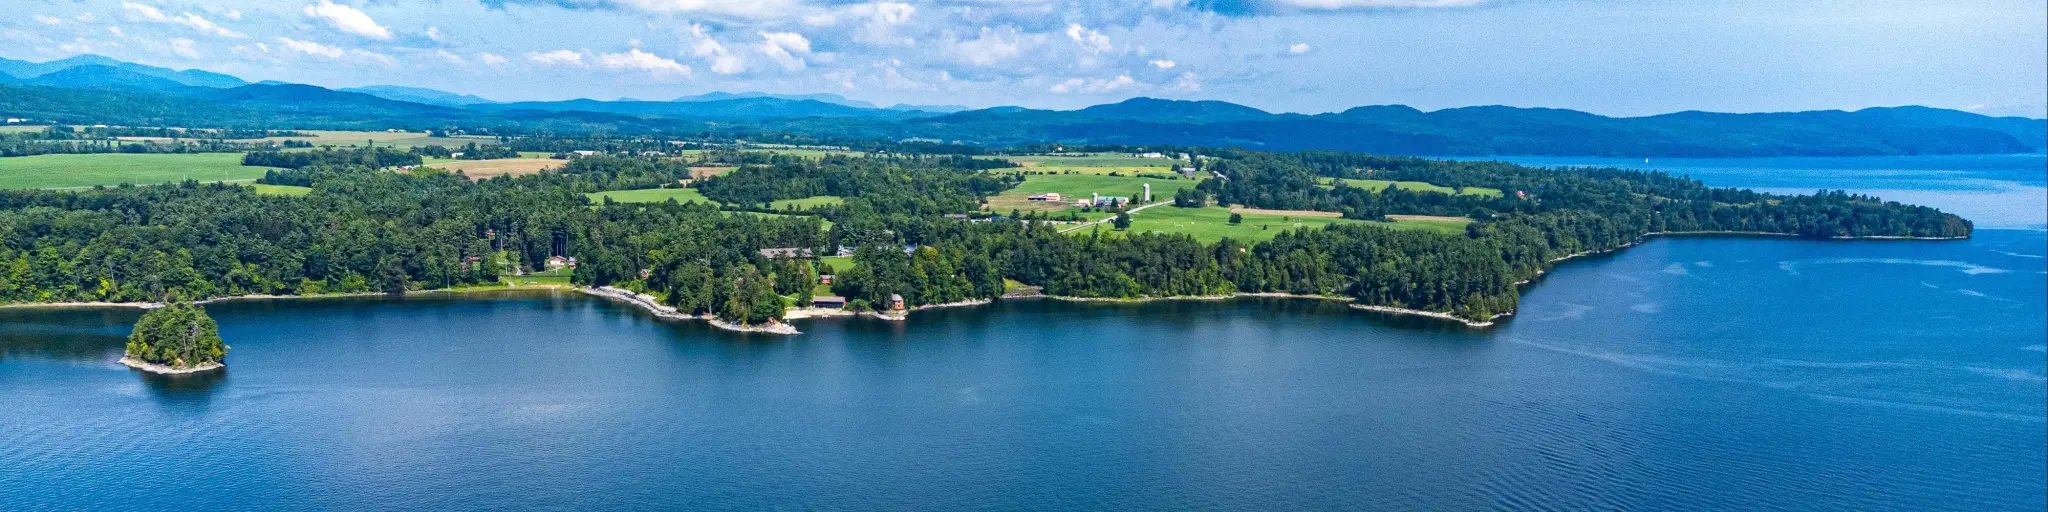 Aerial view of the scenic green landscape and blue lake and skies across Lake Champlain, New York